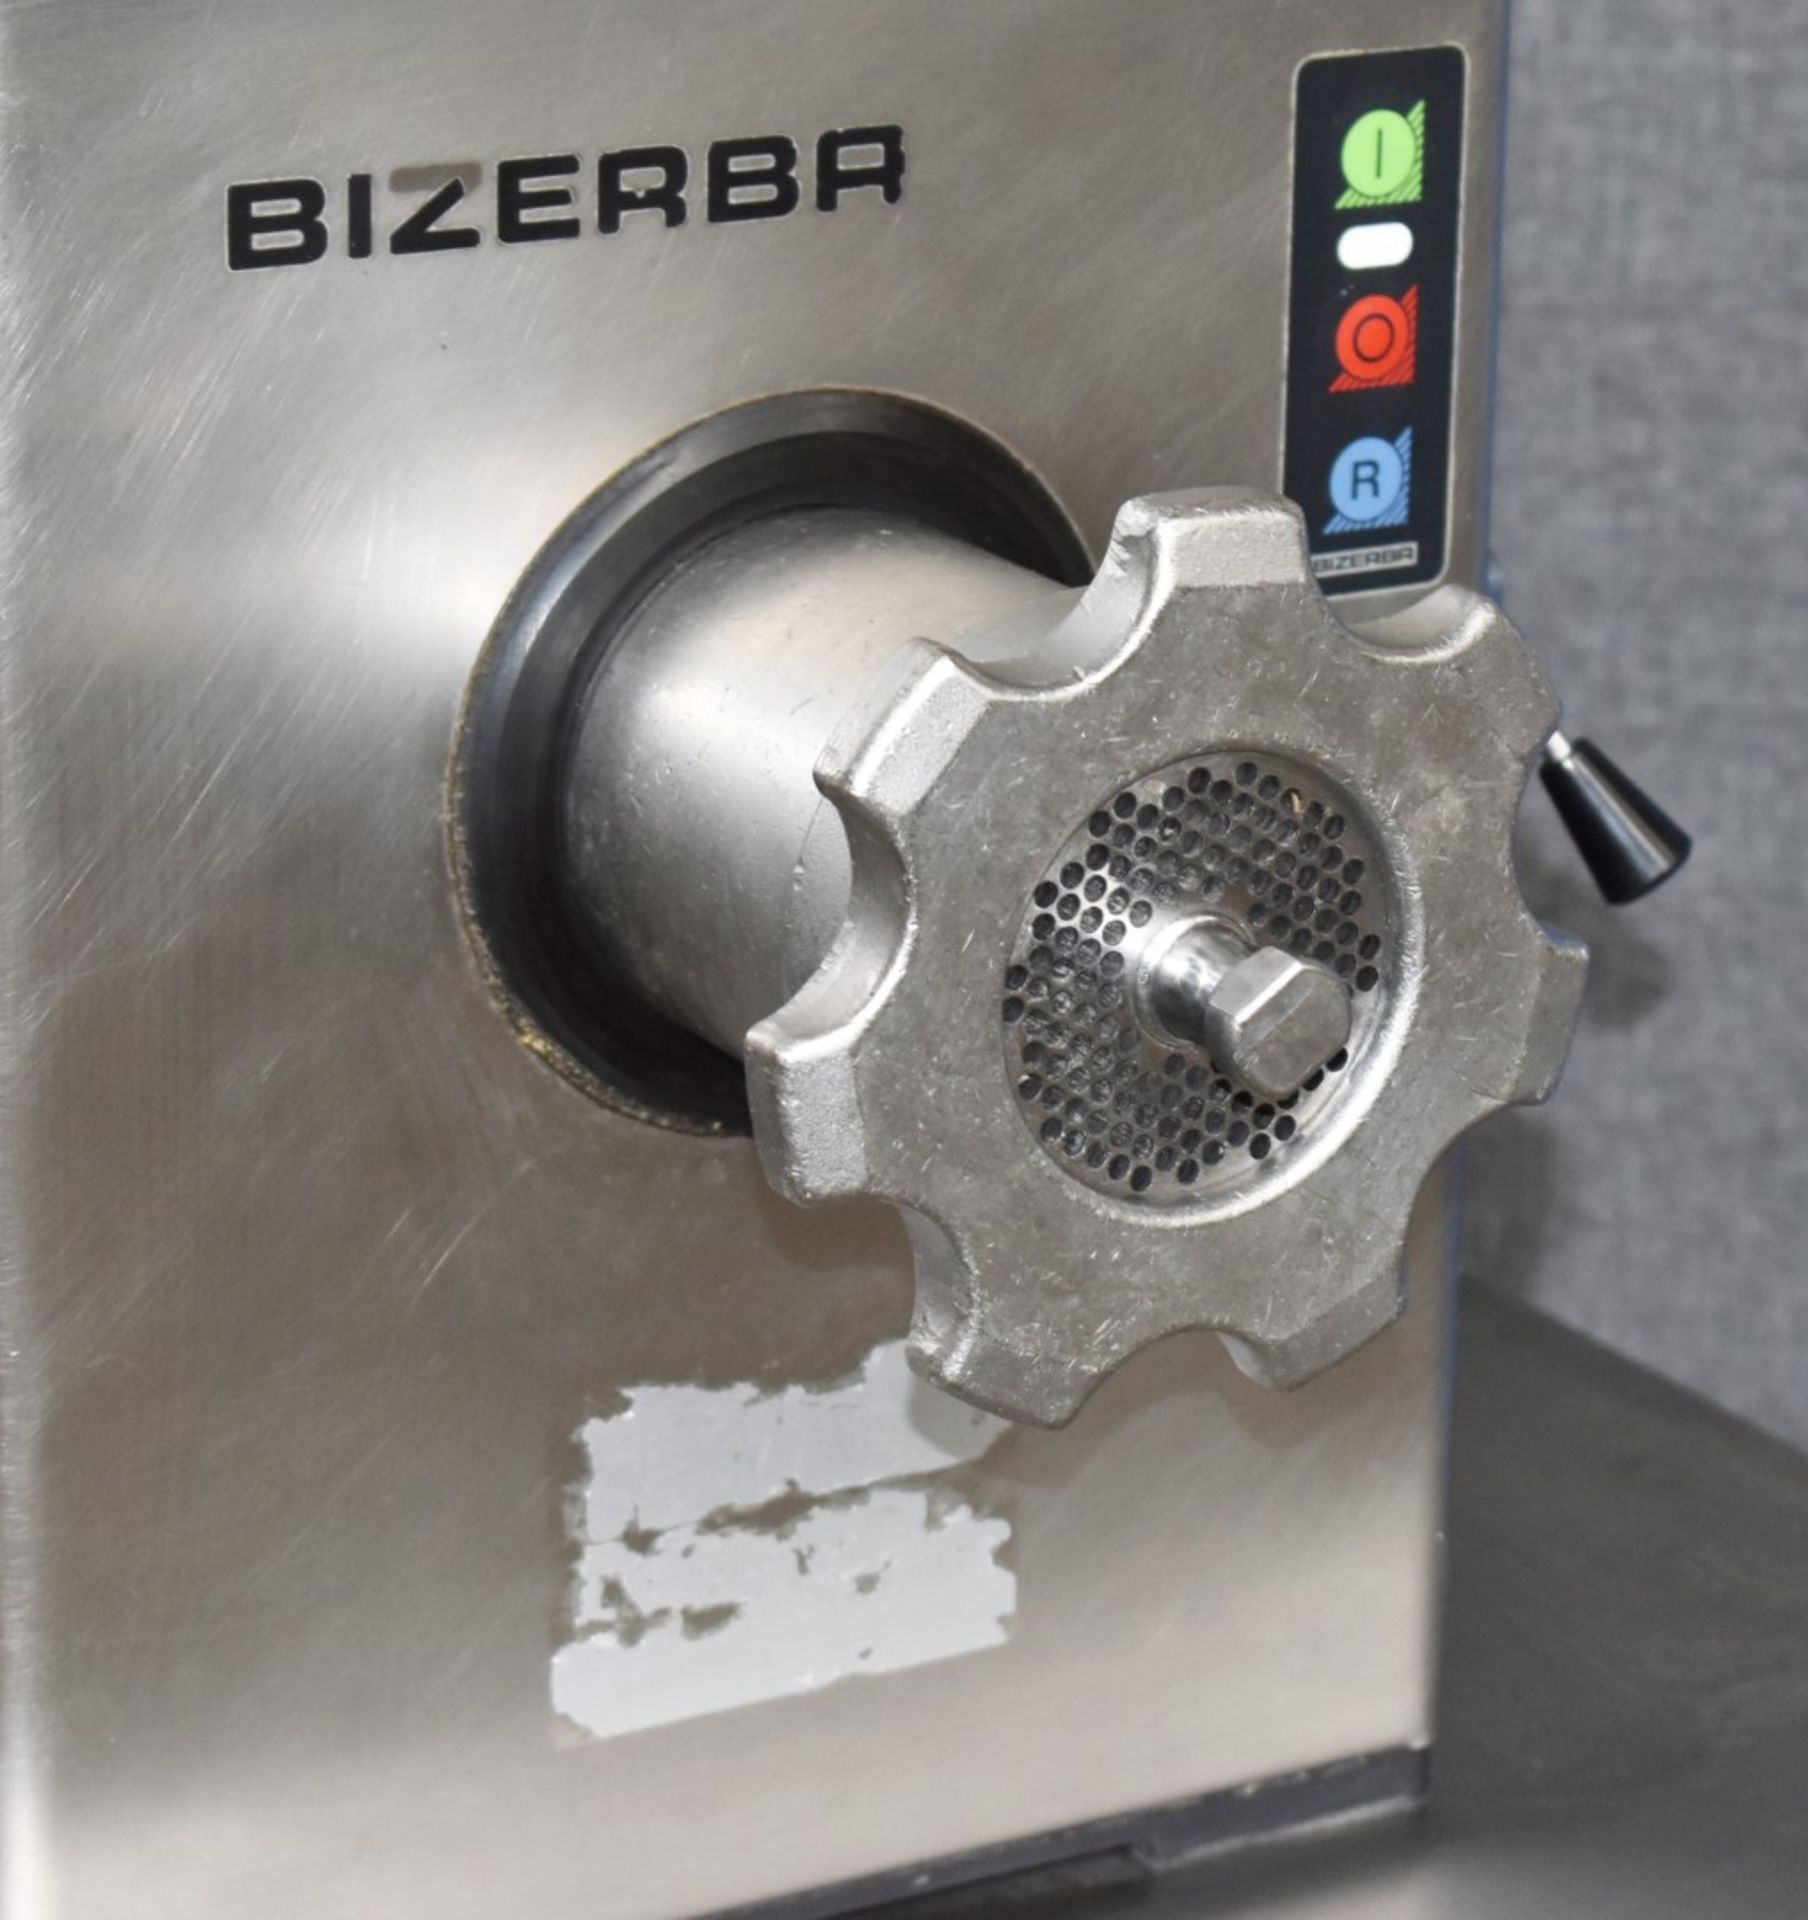 1 x Bizerba Meat Mincer - Stainless Steel Construction - Model FW-N 22/2 - 240v UK Plug - Recently - Image 11 of 12